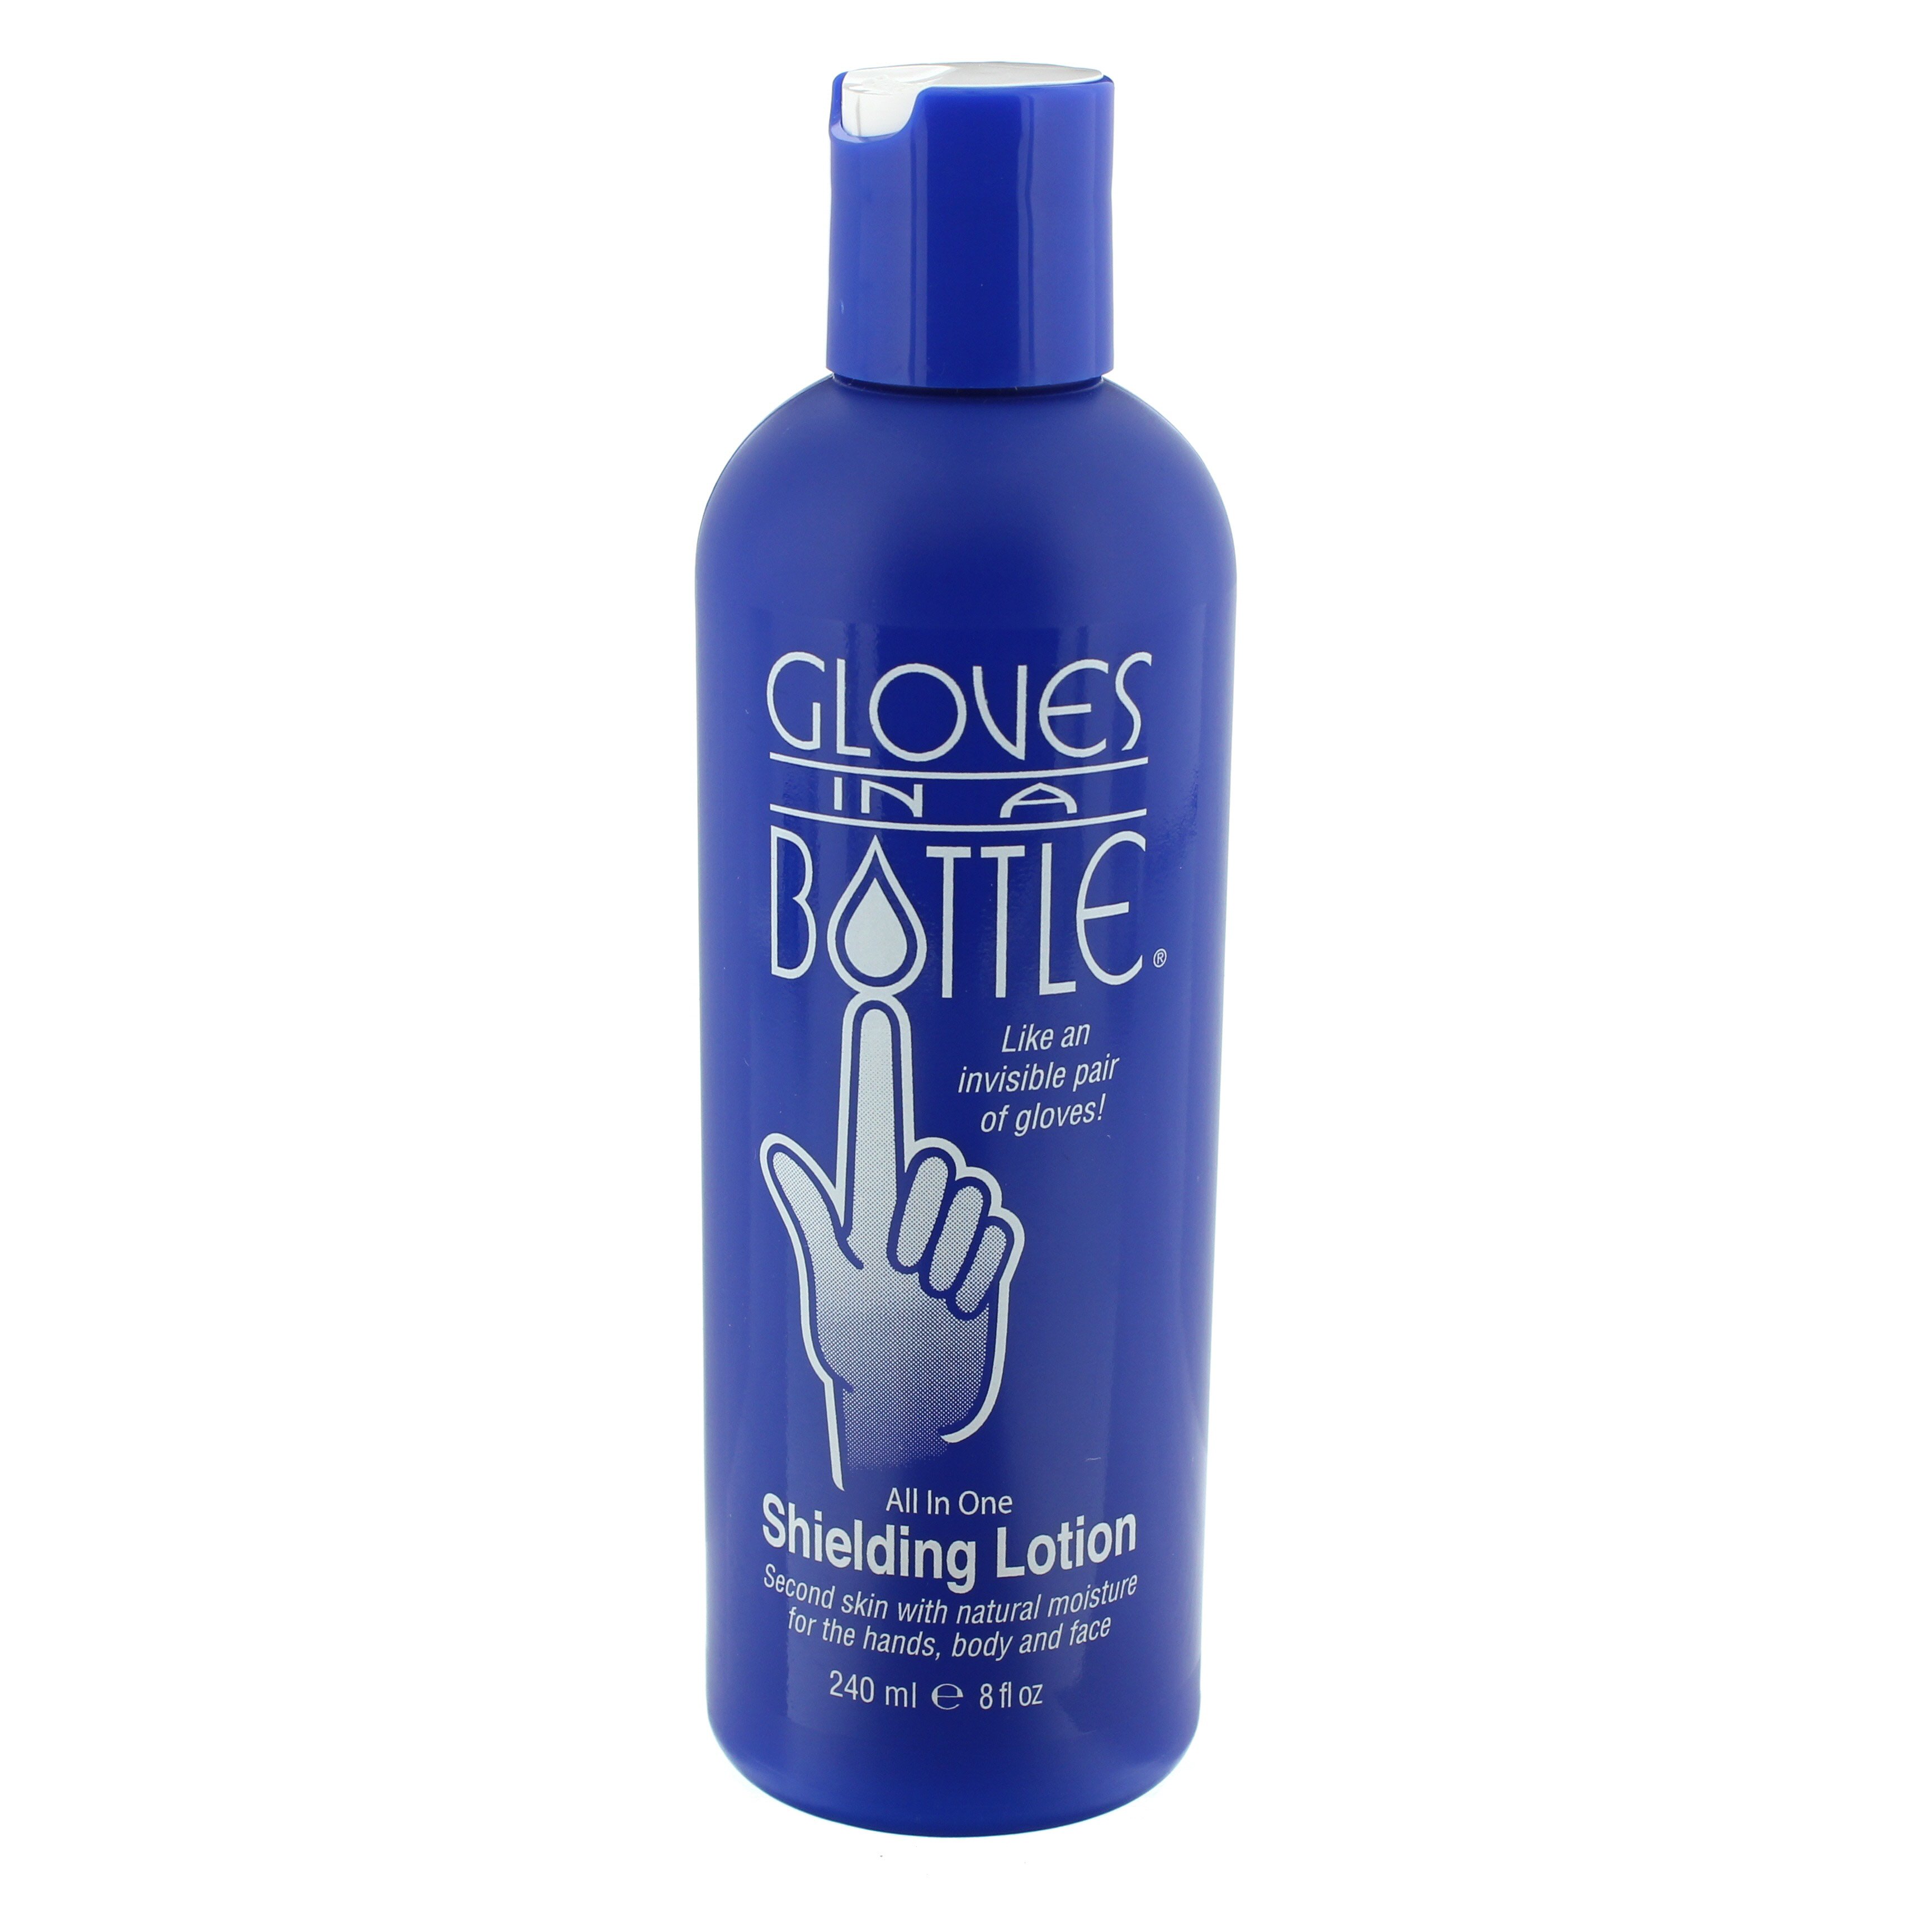 Gloves In A Bottle Shielding Lotion - Review 